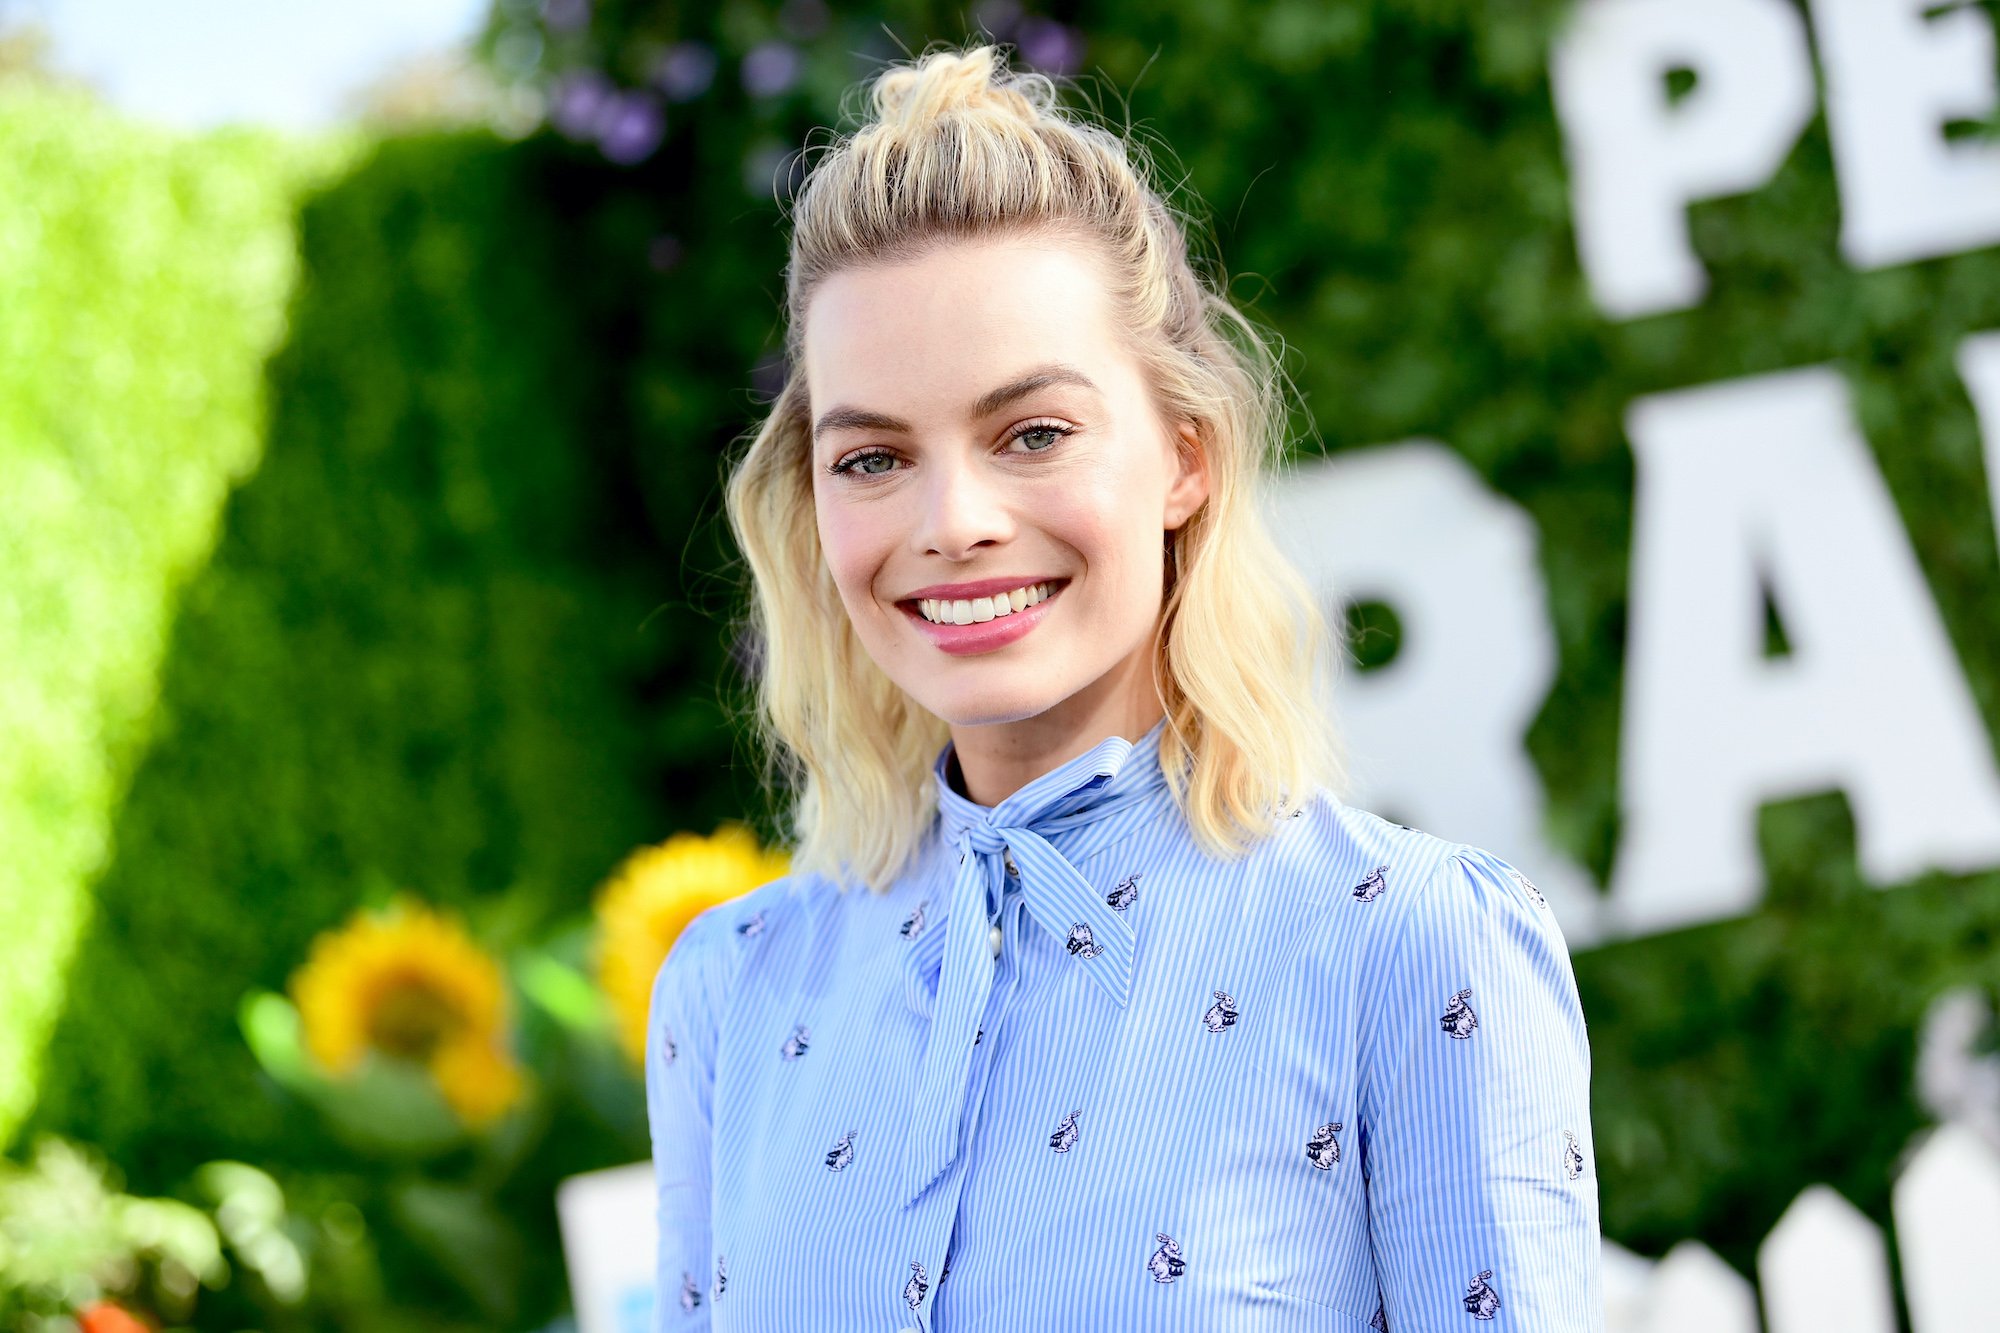 Margot Robbie attends the photo call for Columbia Pictures' 'Peter Rabbit' at The London Hotel on February 2, 2018